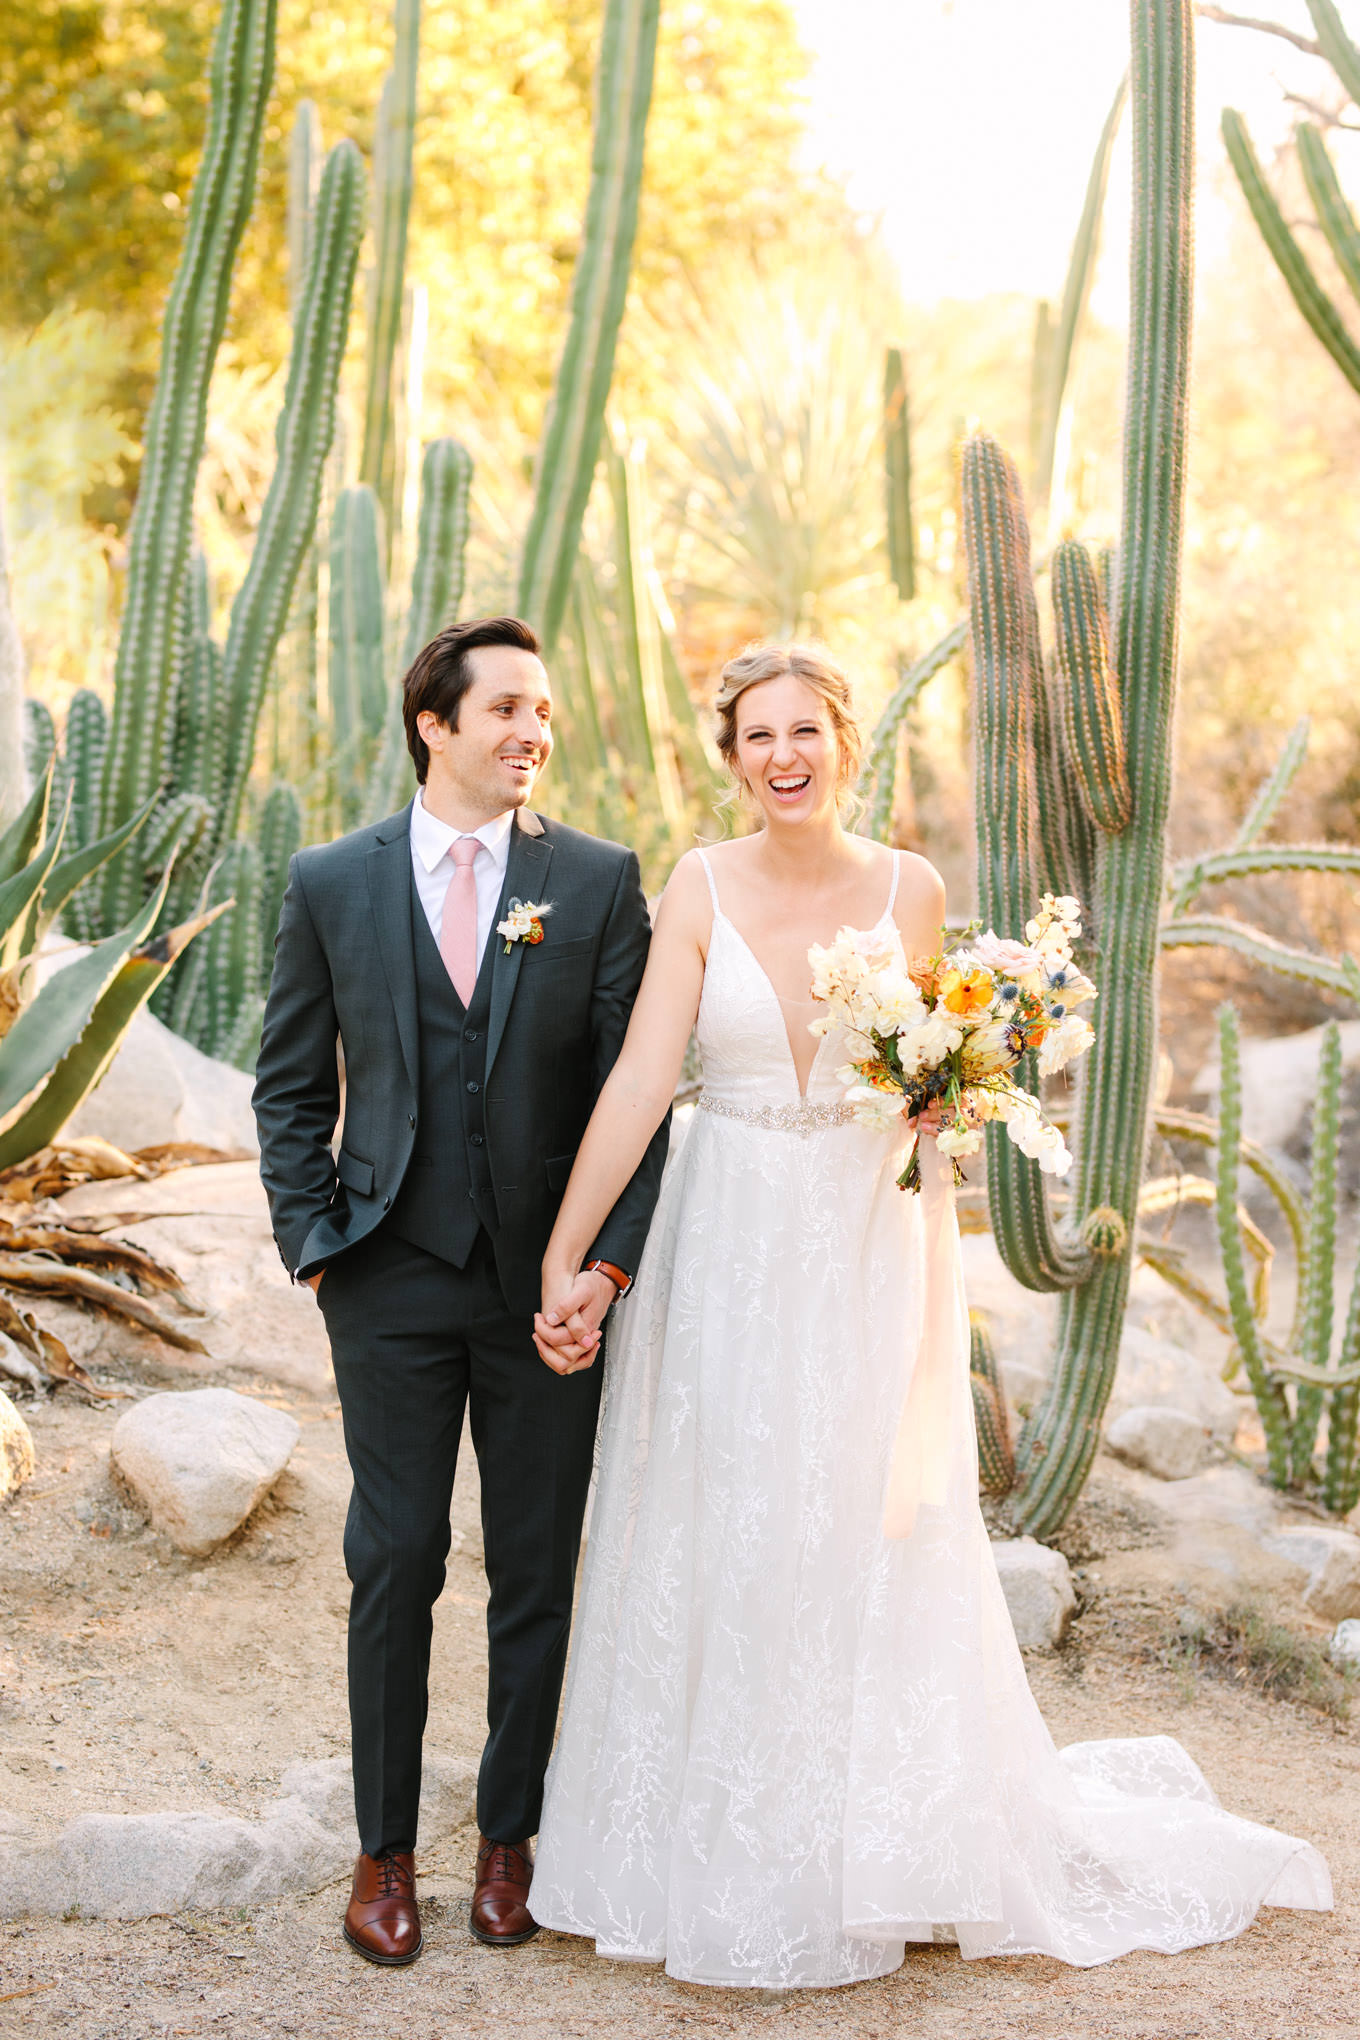 Living Desert Zoo wedding | Engagement, elopement, and wedding photography roundup of Mary Costa’s favorite images from 2020 | Colorful and elevated photography for fun-loving couples in Southern California | #2020wedding #elopement #weddingphoto #weddingphotography   Source: Mary Costa Photography | Los Angeles